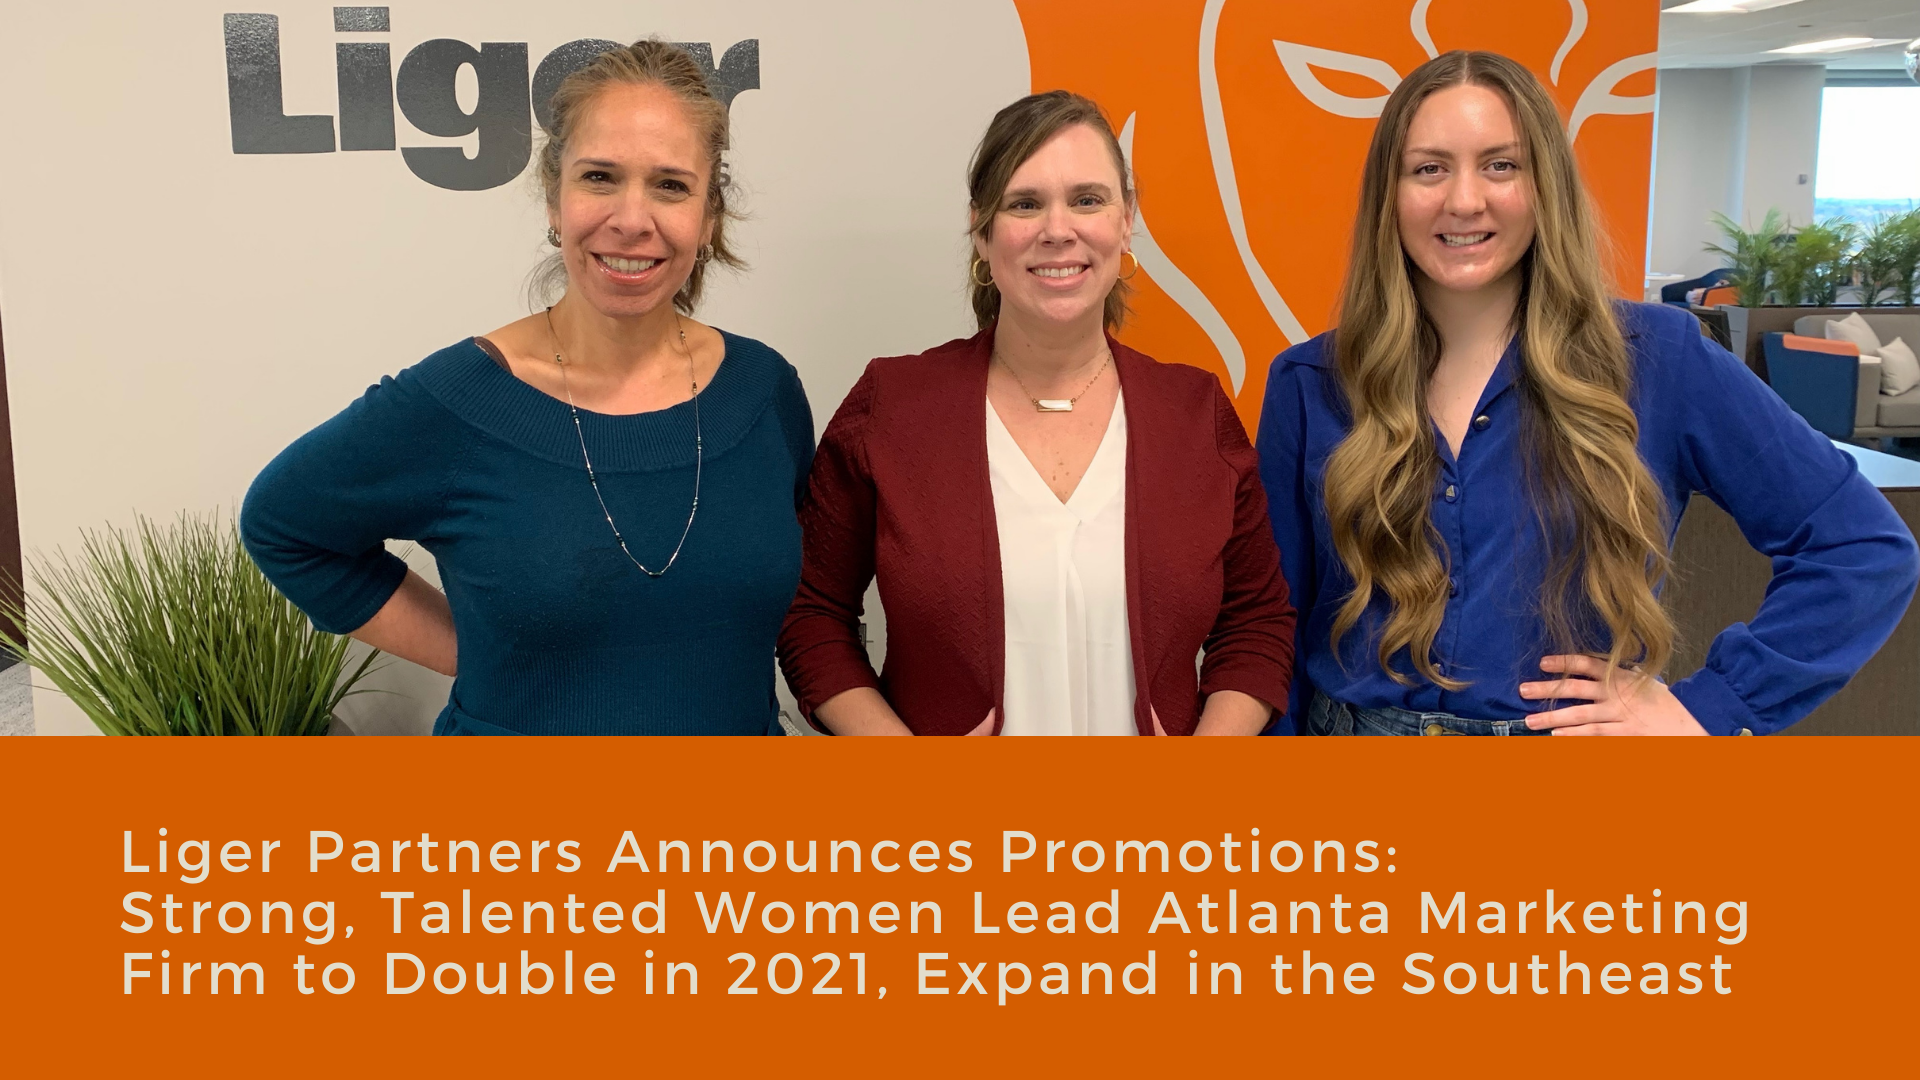 Liger Partners Announces Promotions: Strong, Talented Women Lead Atlanta Marketing Firm to Double in 2021, Expand in the Southeast